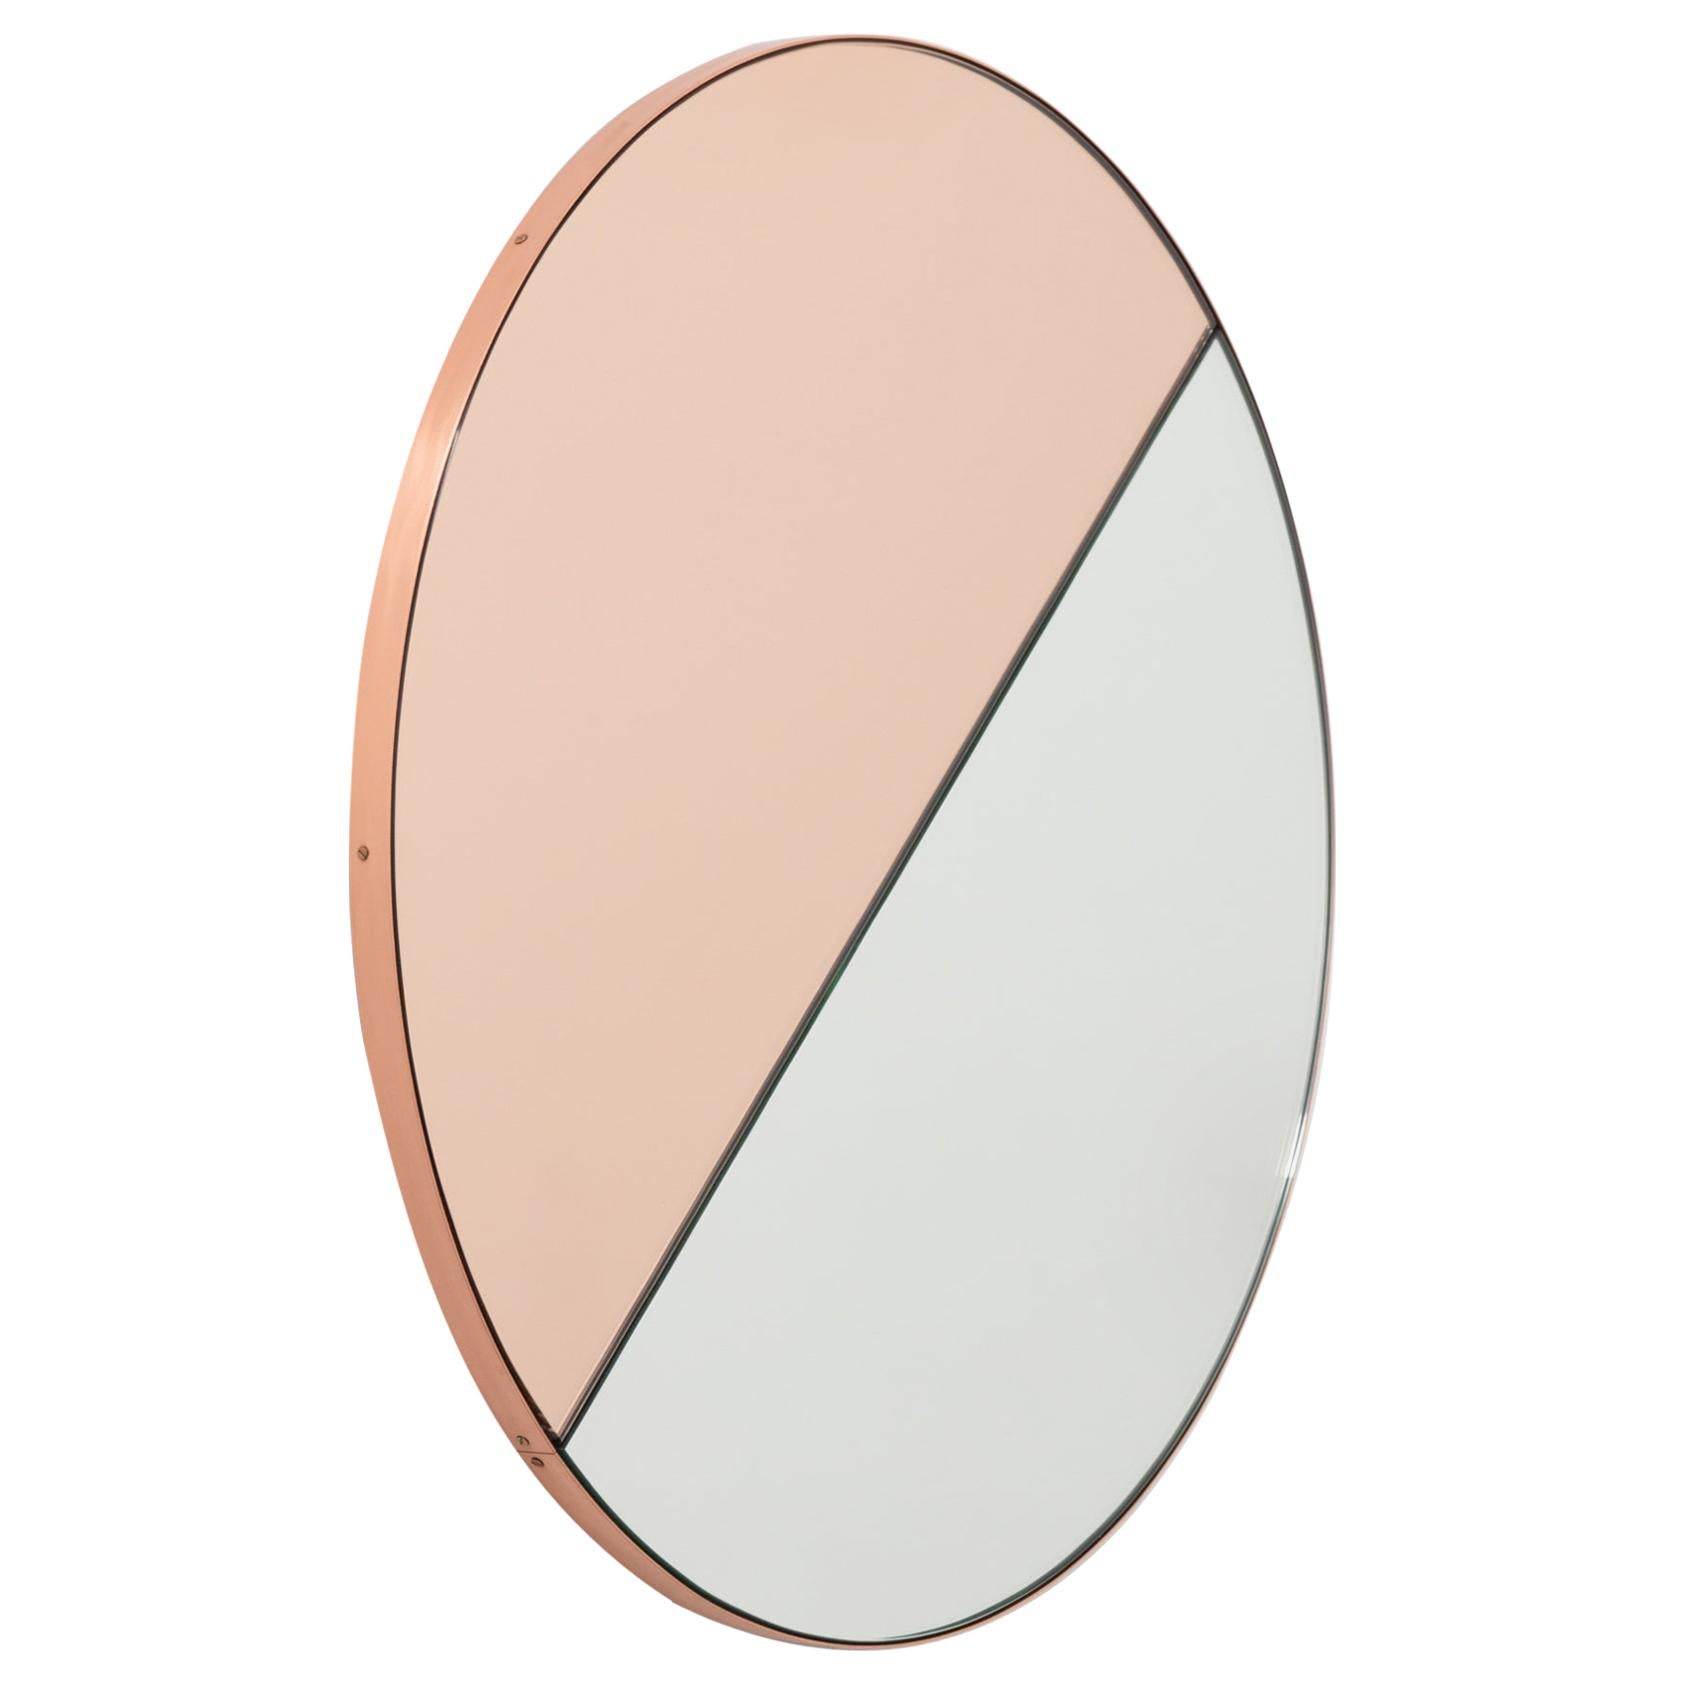 Orbis Dualis Mixed Rose Gold Tint Minimalist Round Mirror, Copper Frame, Regular For Sale